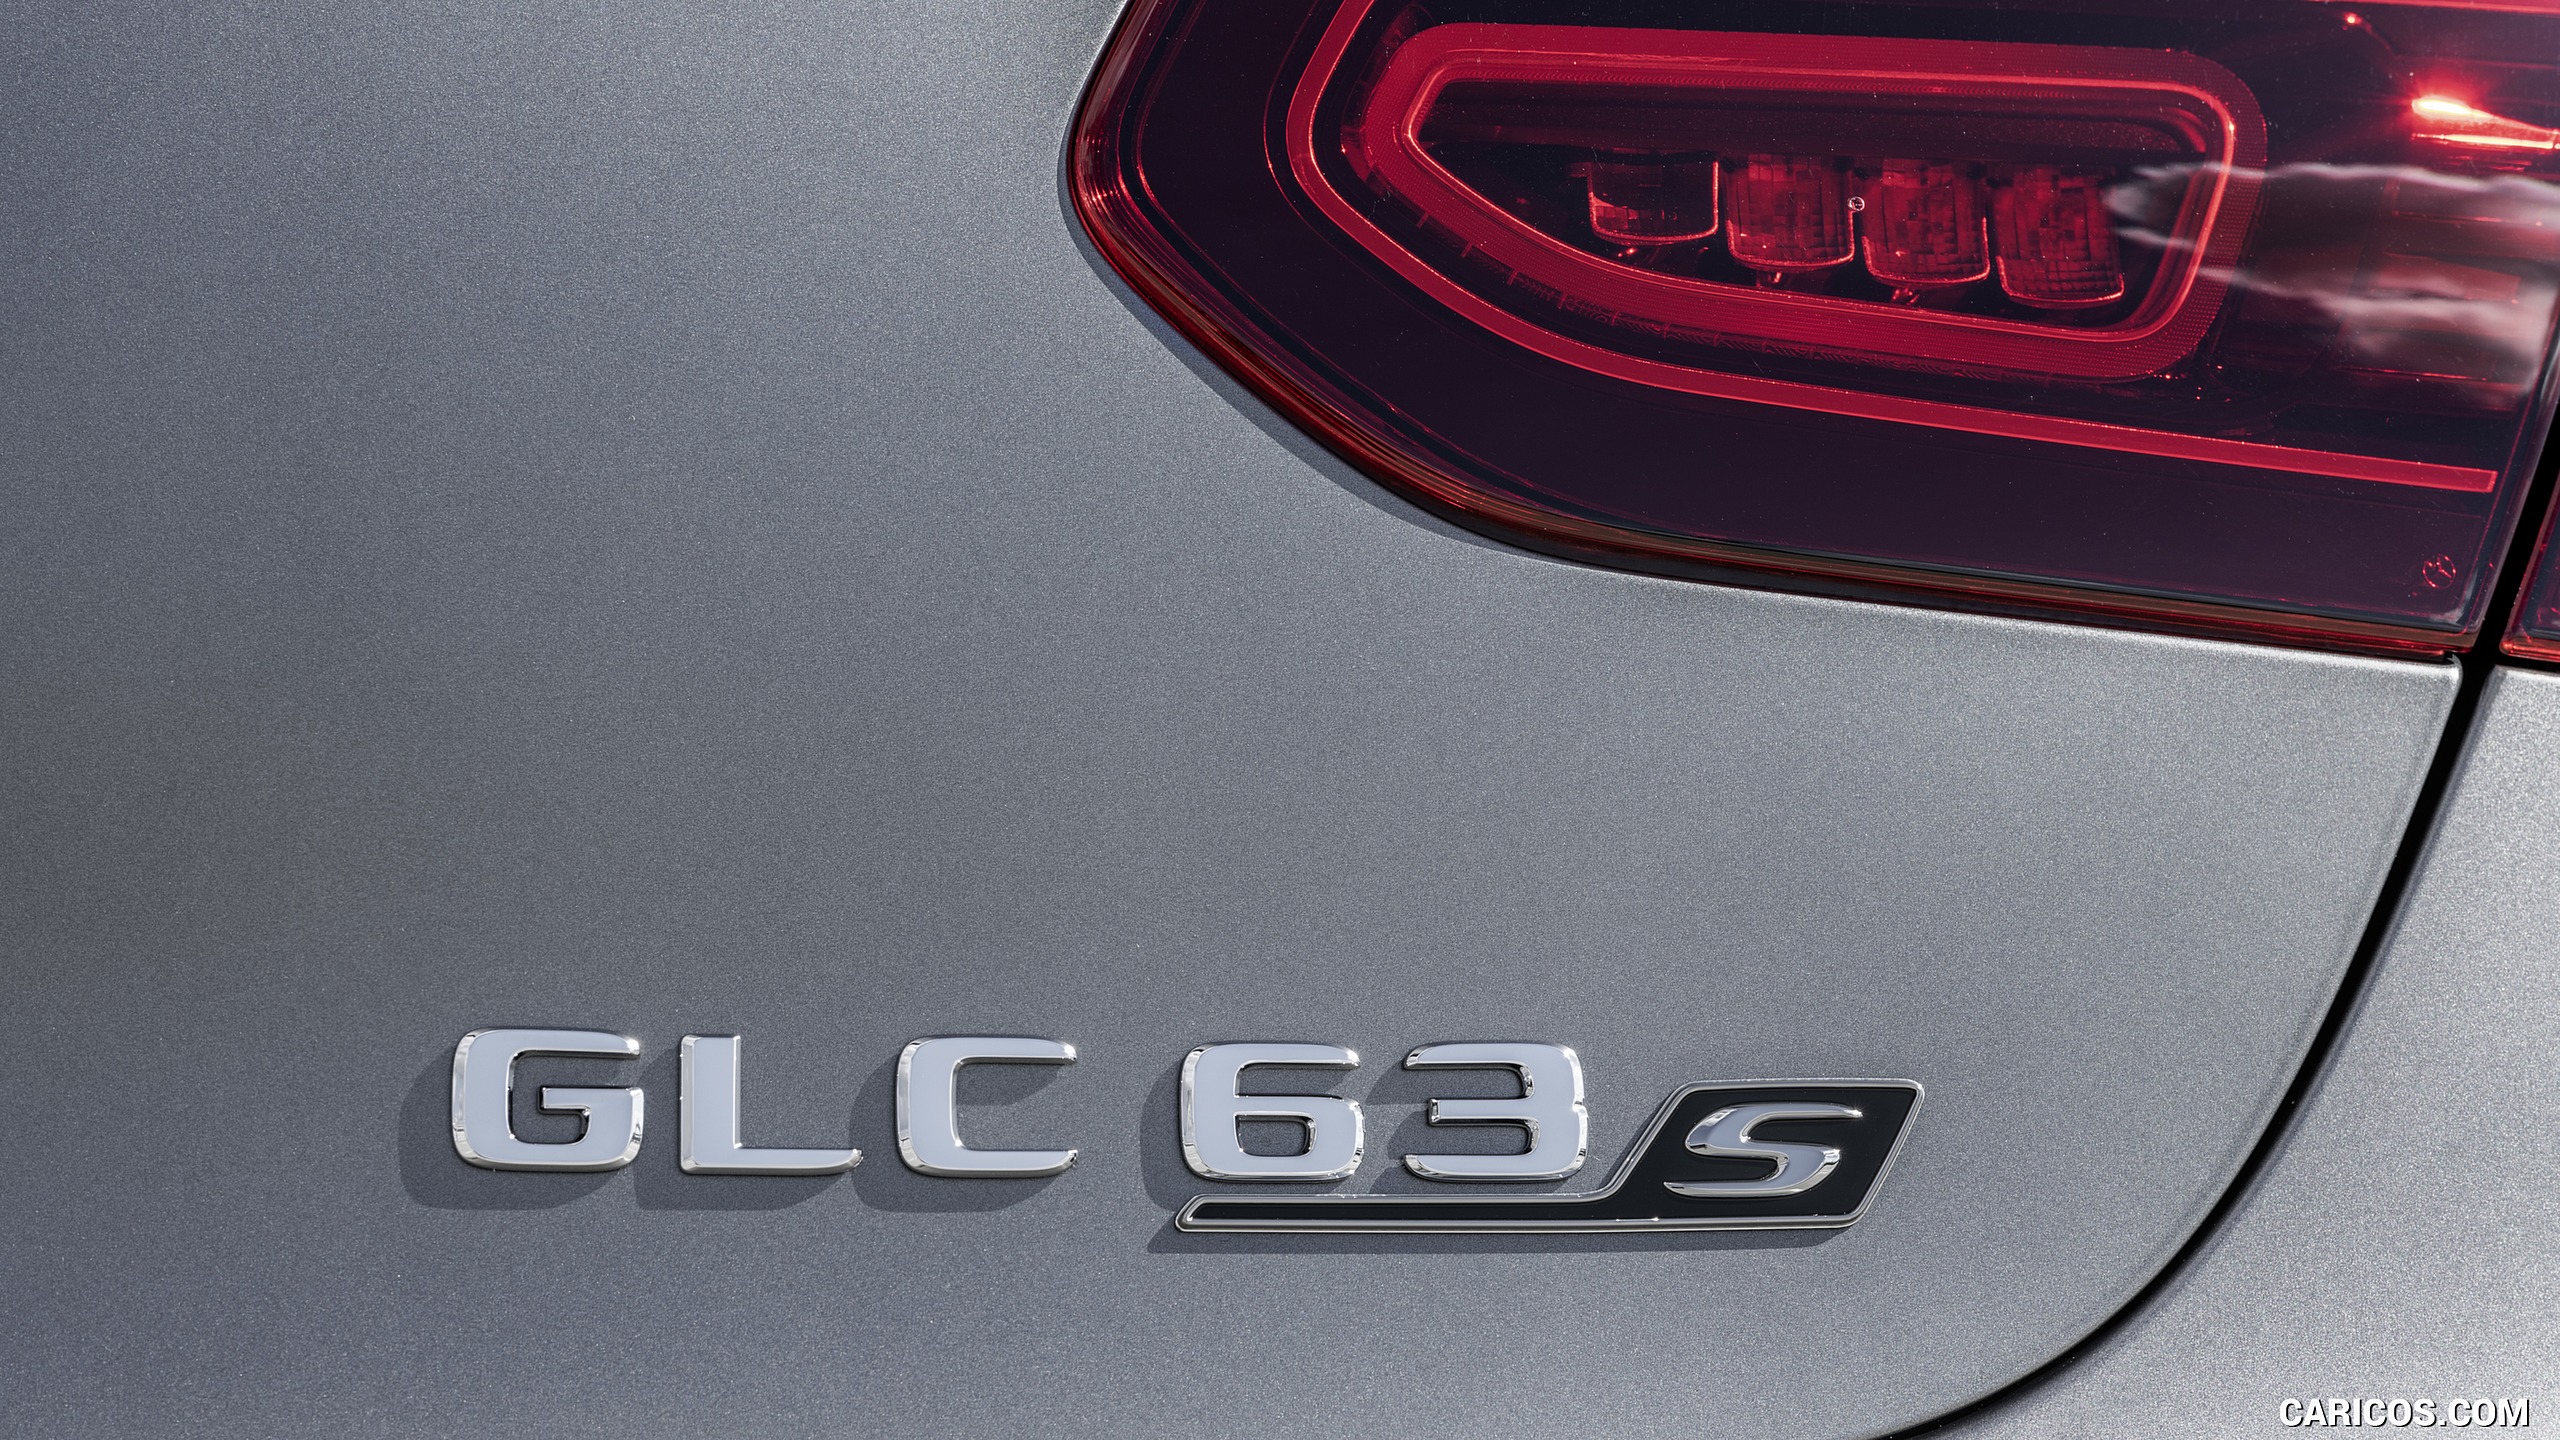 2020 Mercedes-AMG GLC 63 S 4MATIC+ Coupe - Badge, #15 of 102